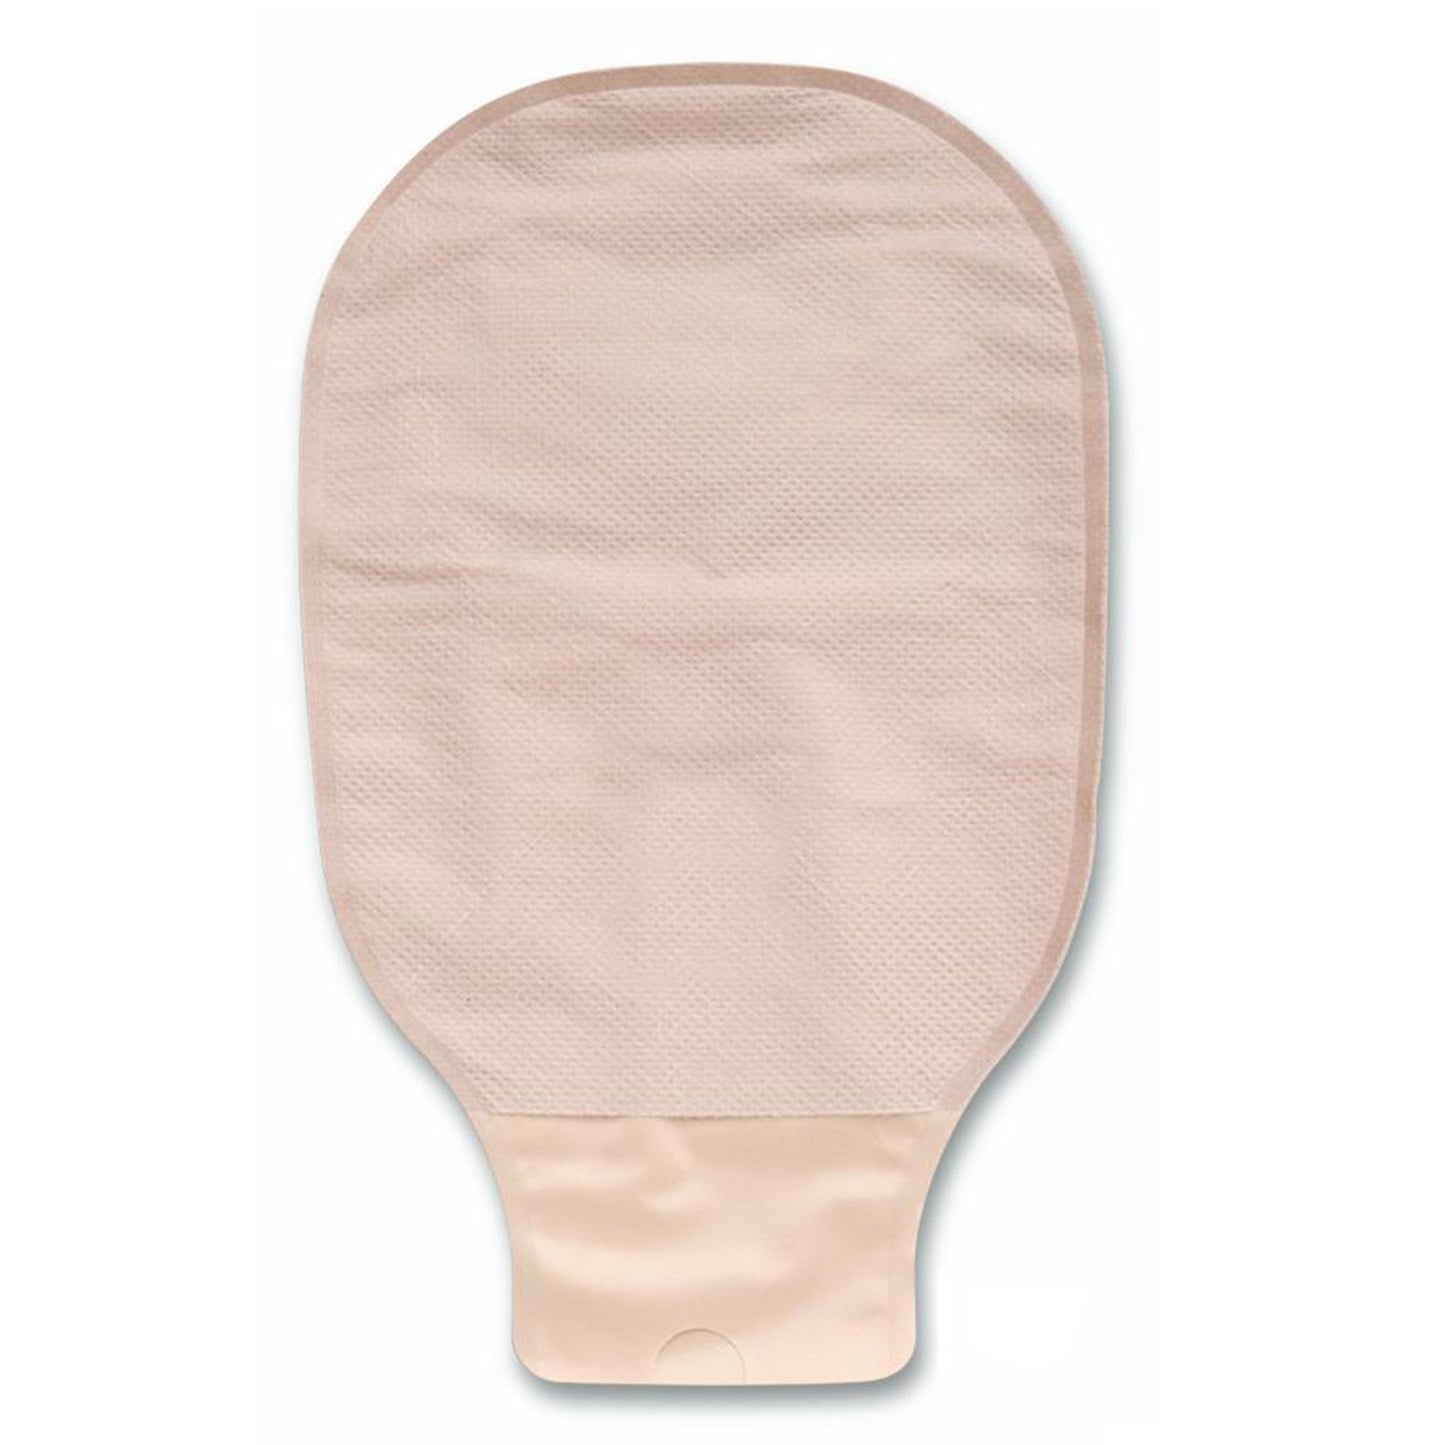 New Image™ Drainable Beige Colostomy Pouch, 9 Inch Length, Mini, 2.25 Inch Flange, 10 ct